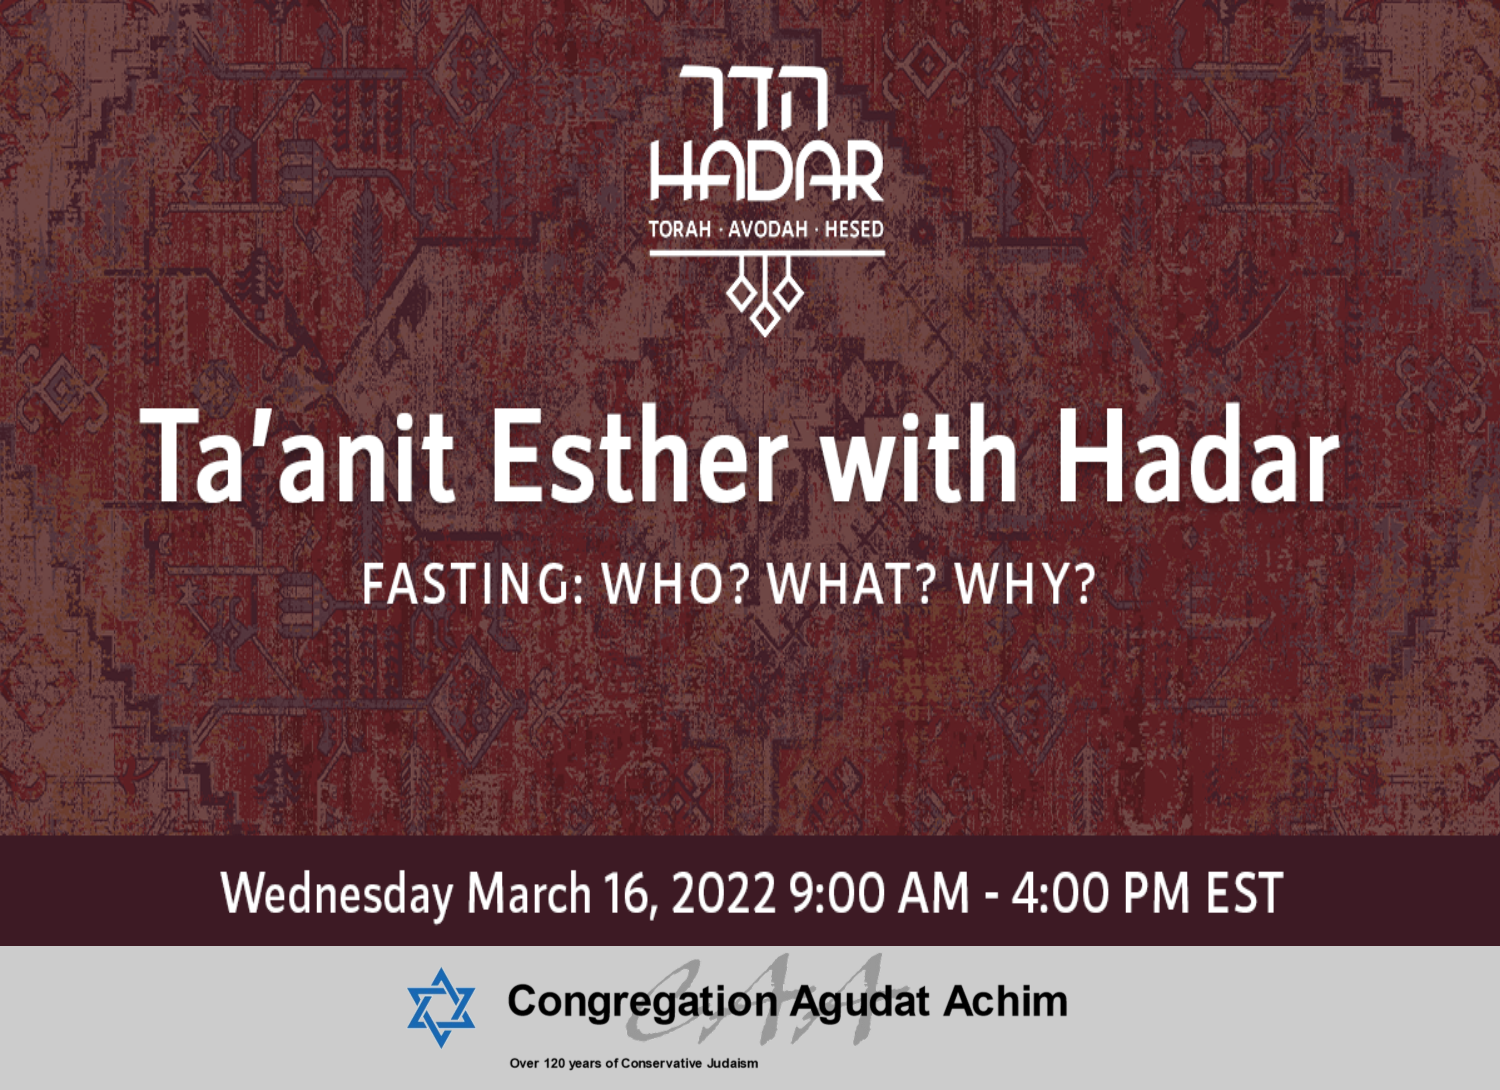 Ta'anit Esther with Hadar